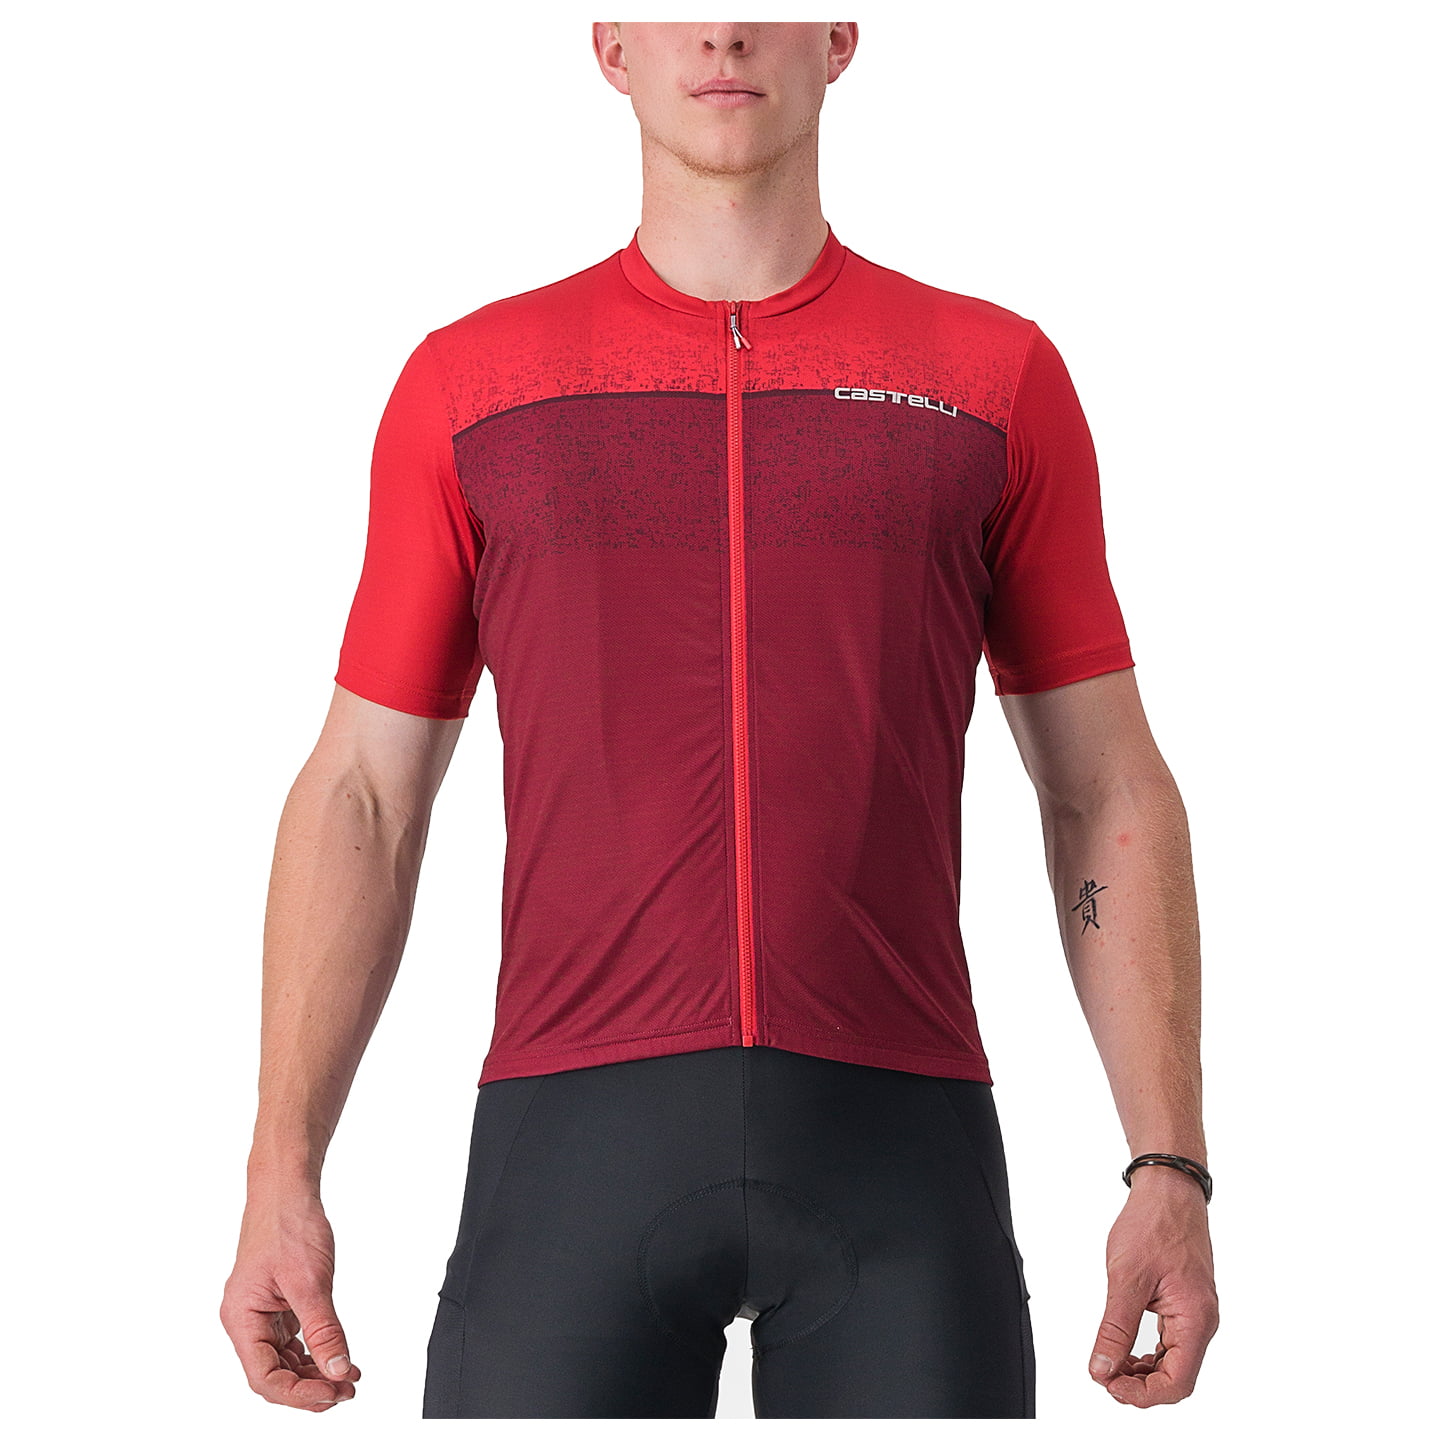 CASTELLI Unlimited Entrata Short Sleeve Jersey Short Sleeve Jersey, for men, size 2XL, Cycling jersey, Cycle clothing